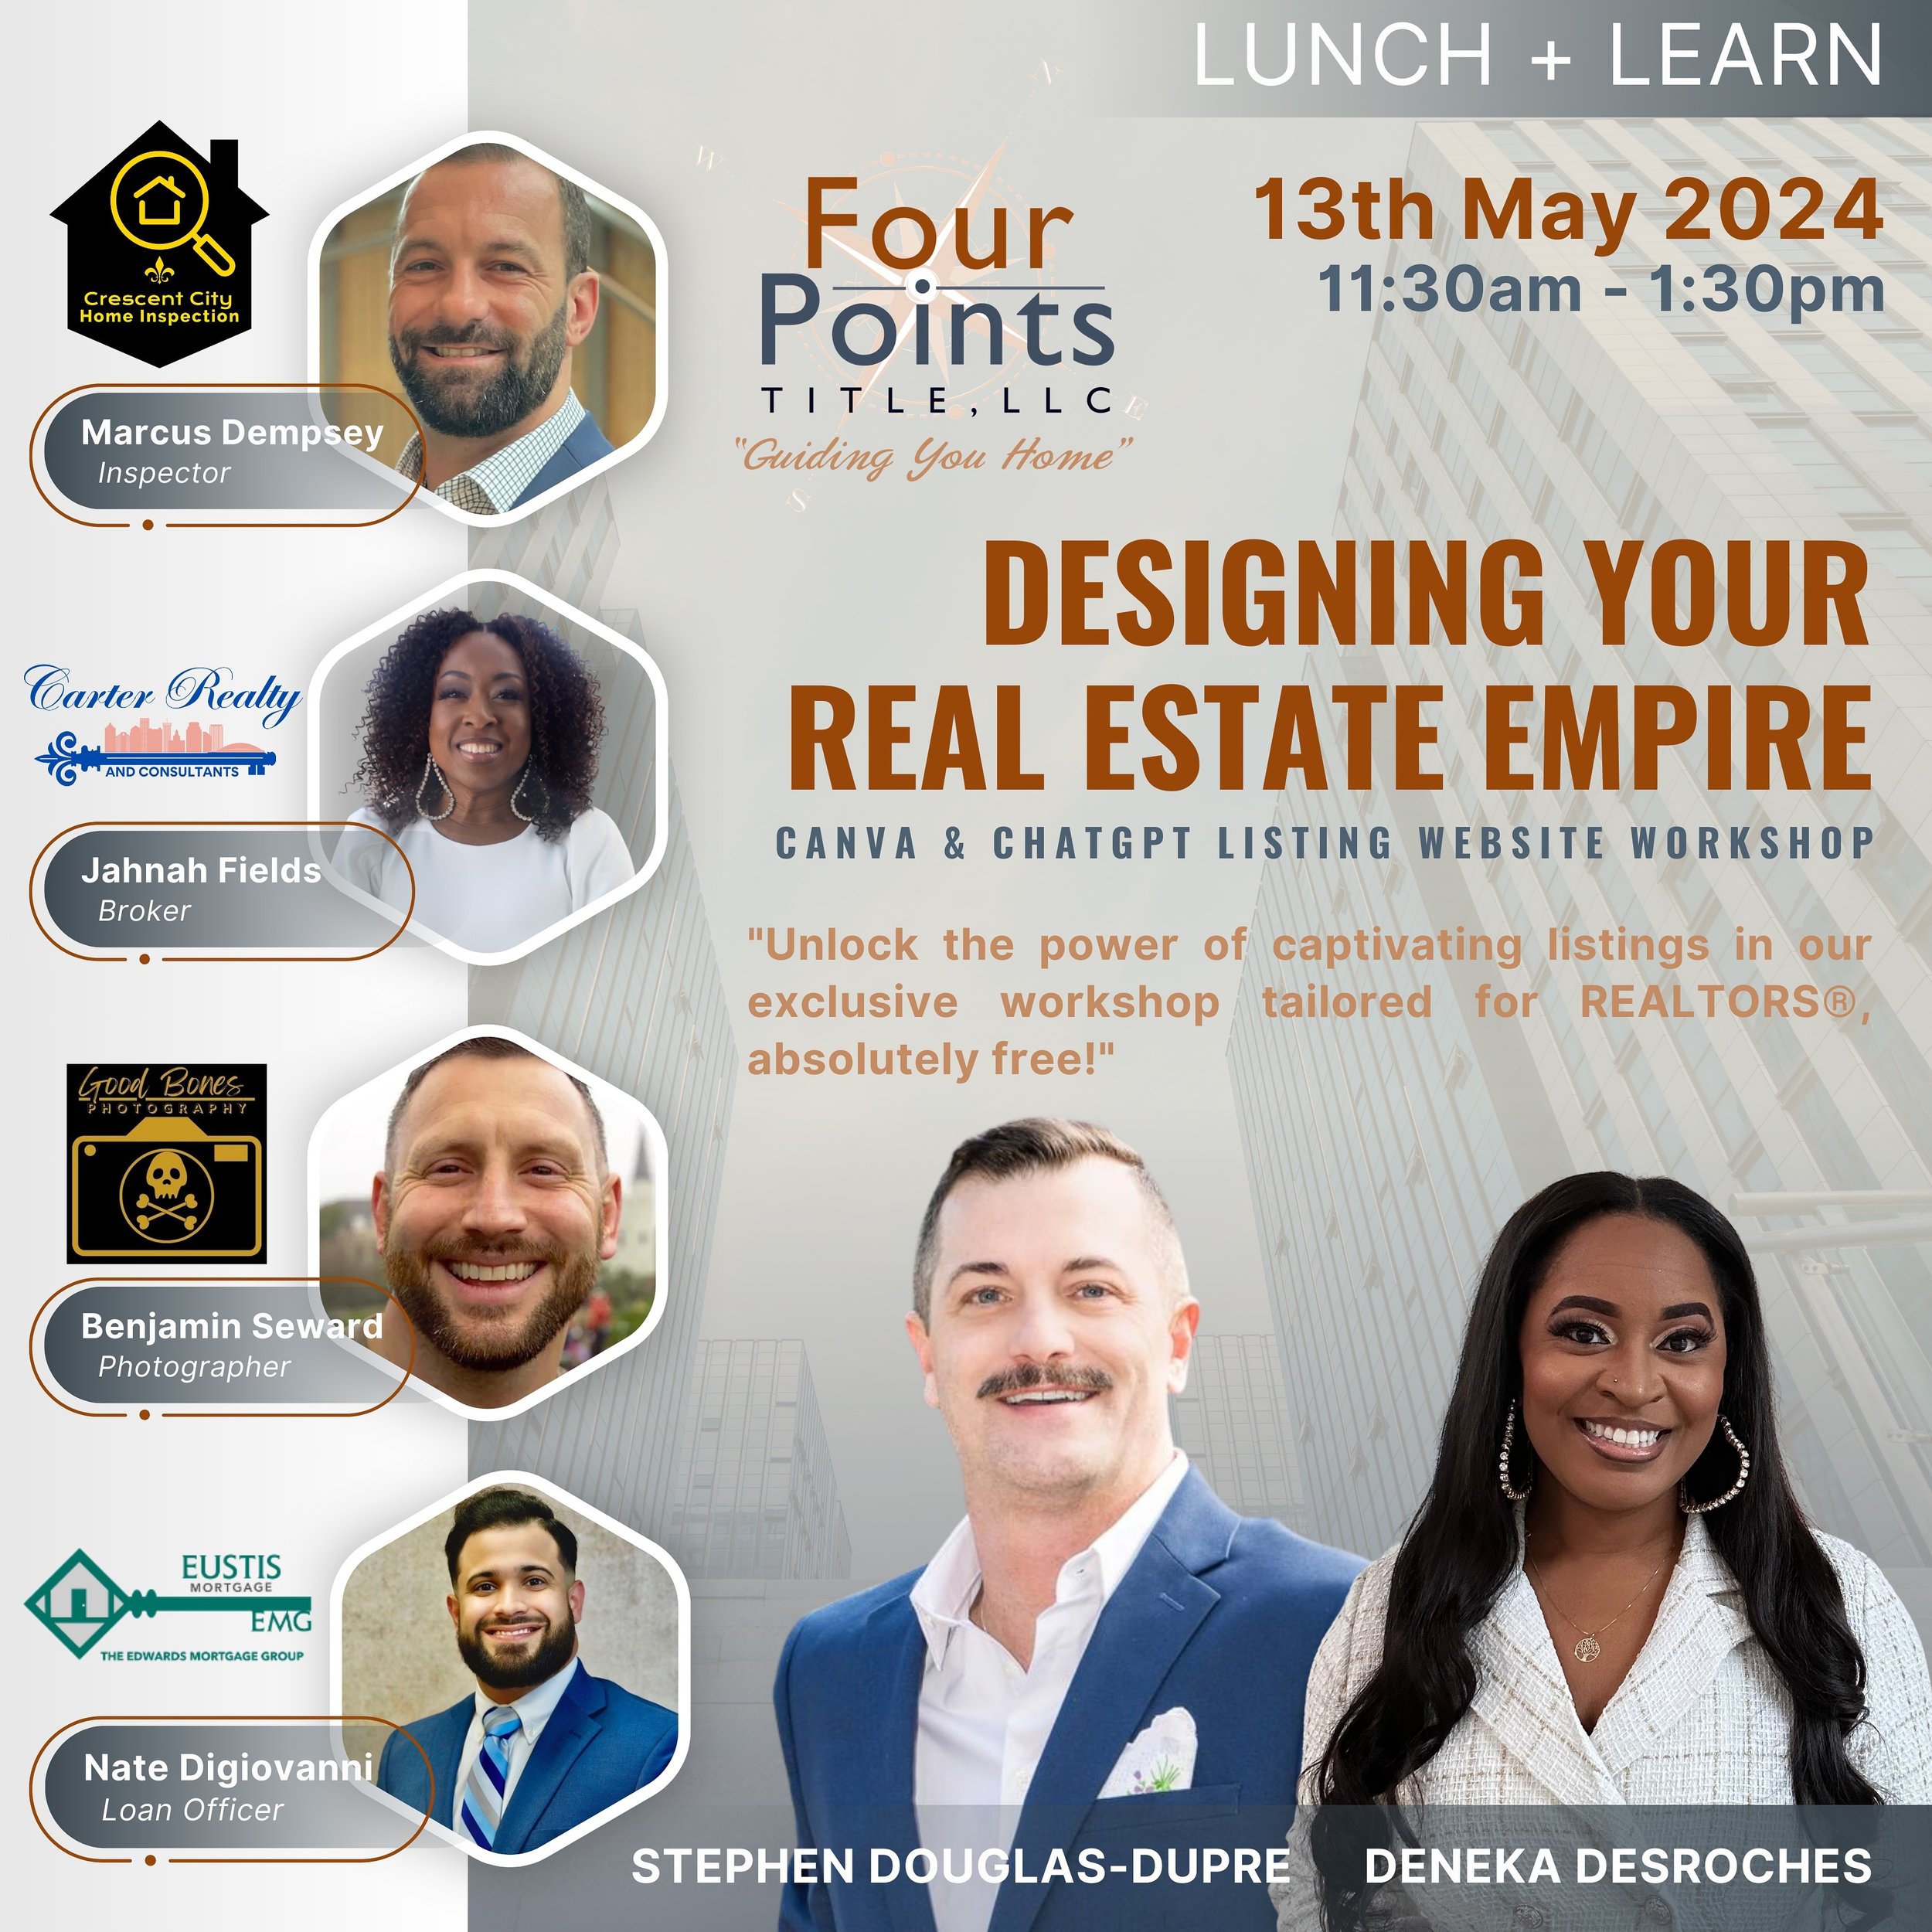 Are you READY TO ELEVATE your real estate game with Canva &amp; ChatGPT?🏡 Join us for an interactive Listing Website workshop on May 13th hosted by Stephen Douglas Dupre @fourpointstitlellc and friends. Lunch, door prizes, and FREE luxury templates 